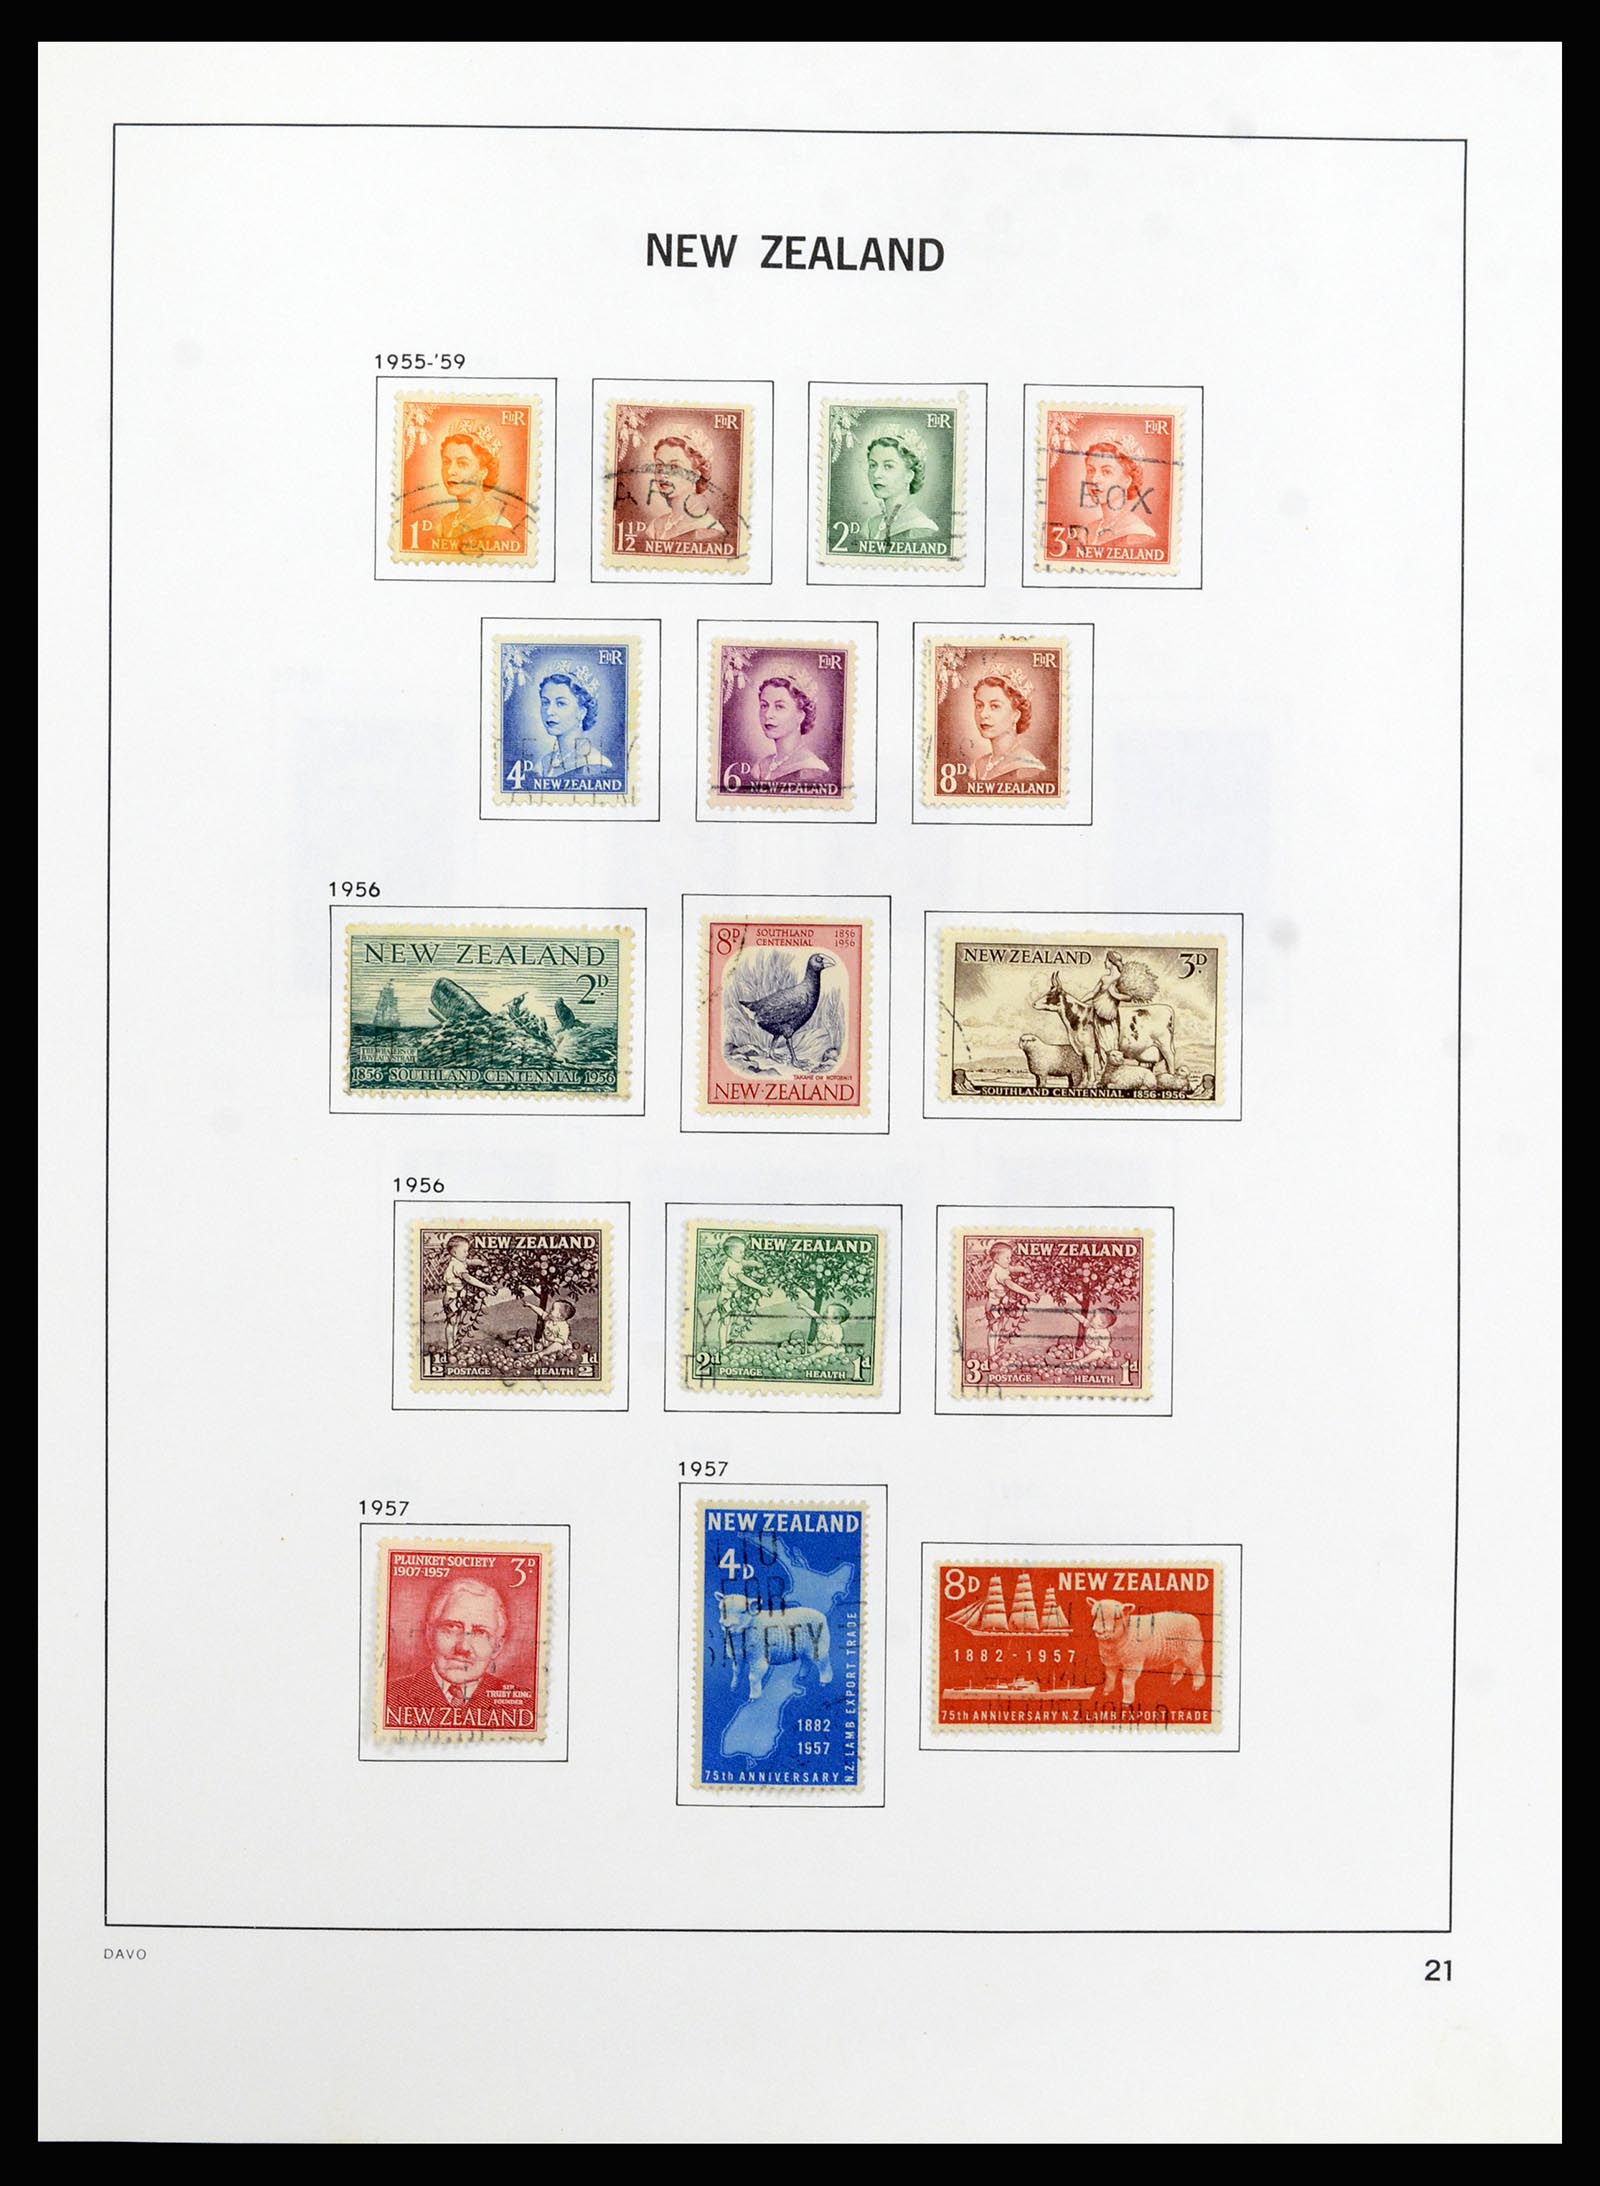 37209 022 - Stamp collection 37209 New Zealand 1855-1997.